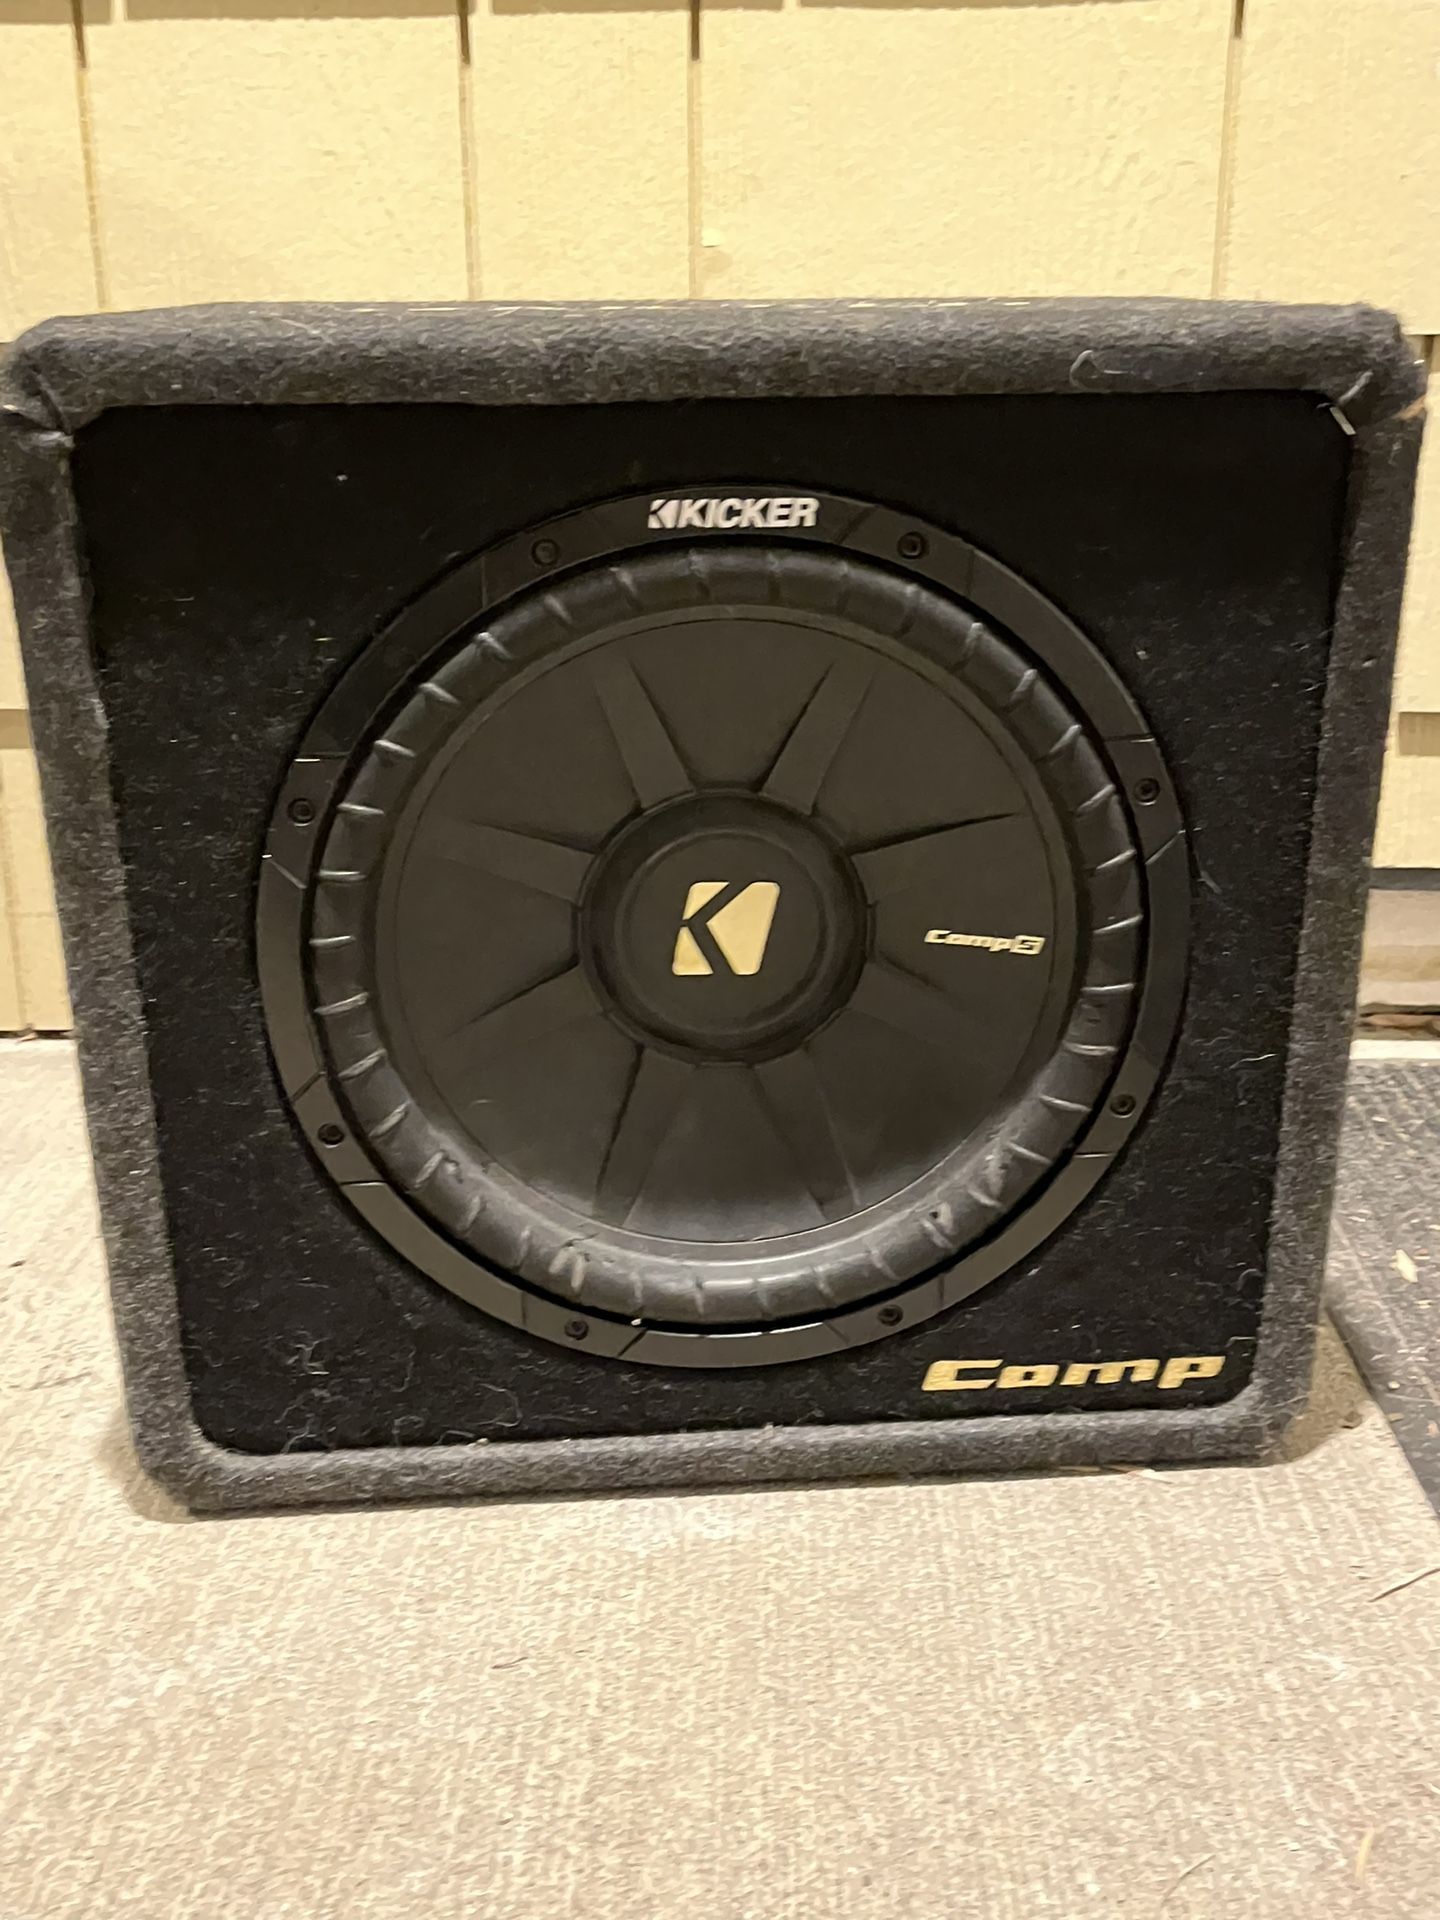 Kicker Comp S 12” Subwoofer In ported kicker comp box